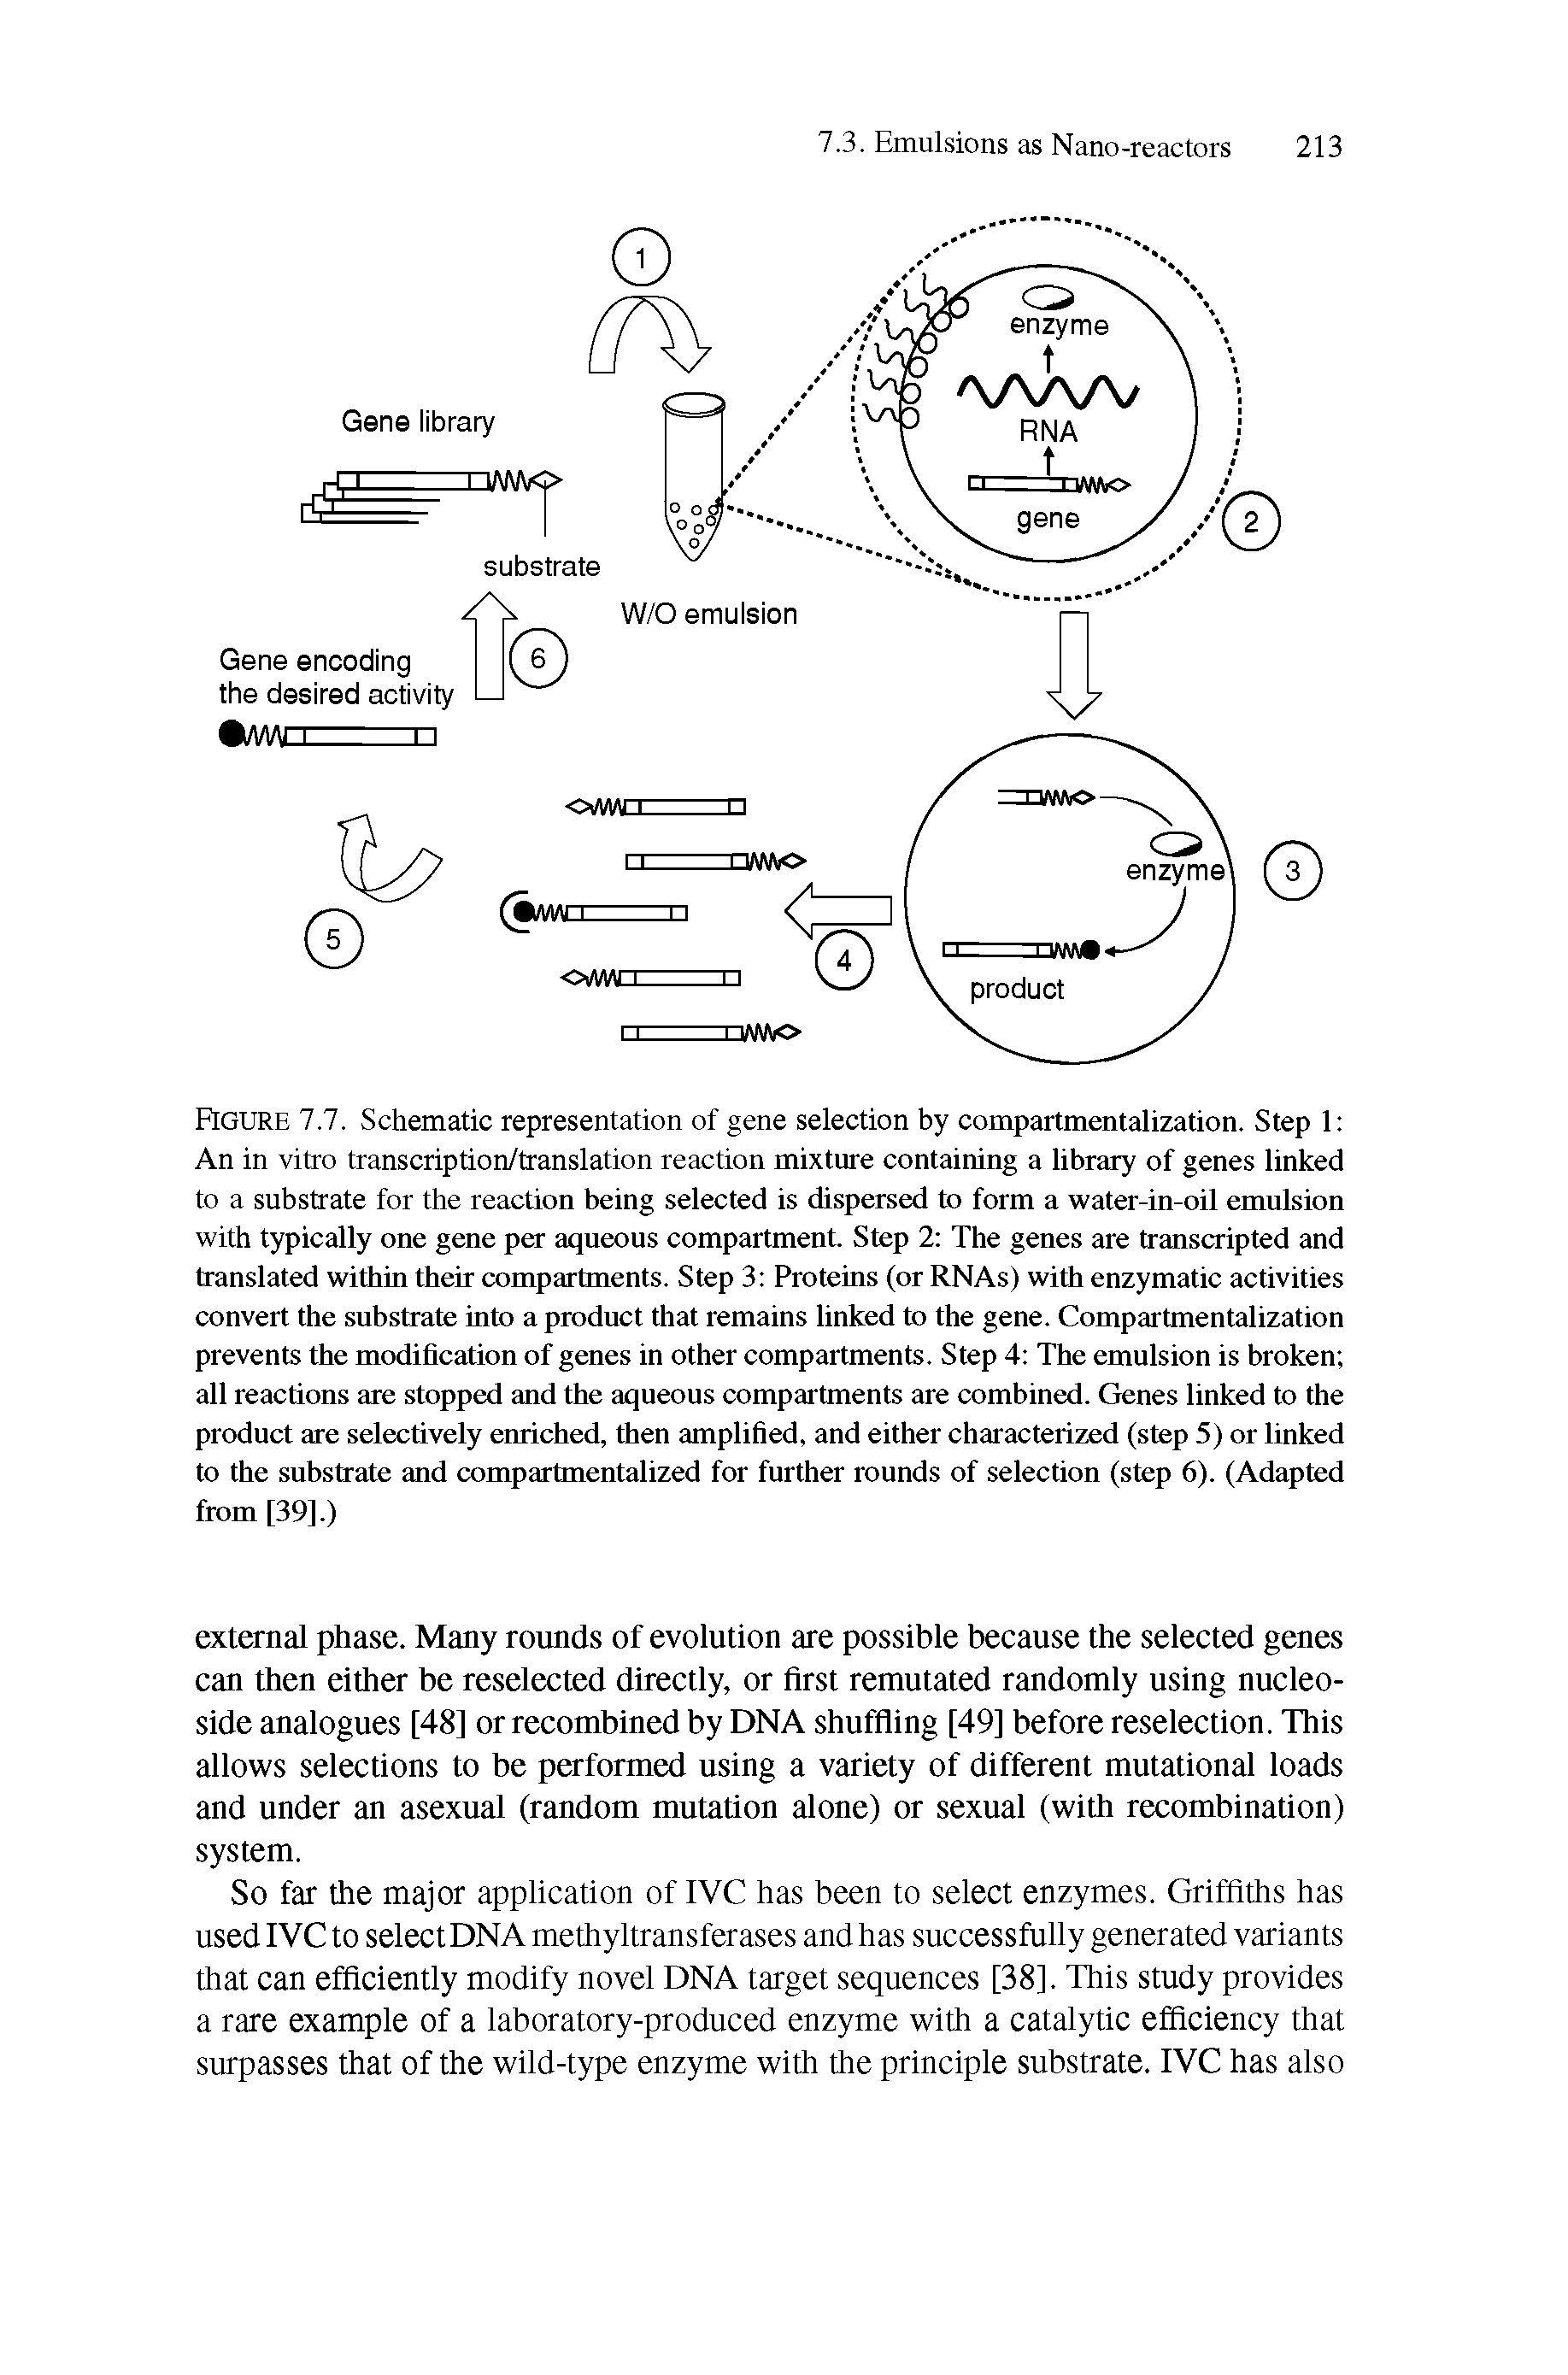 Figure 7.7. Schematic representation of gene selection by compartmentalization. Step 1 An in vitro transcription/translation reaction mixture containing a library of genes linked to a substrate for the reaction being selected is dispersed to form a water-in-oil emulsion with typically one gene per aqueous compartment. Step 2 The genes are transcripted and translated within their compartments. Step 3 Proteins (or RNAs) with enzymatic activities convert the substrate into a product that remains linked to the gene. Compartmentalization prevents the modification of genes in other compartments. Step 4 The emulsion is broken all reactions are stopped and the aqueous compartments are combined. Genes linked to the product are selectively enriched, then amplified, and either characterized (step 5) or linked to the substrate and compartmentalized for further rounds of selection (step 6). (Adapted from [39].)...